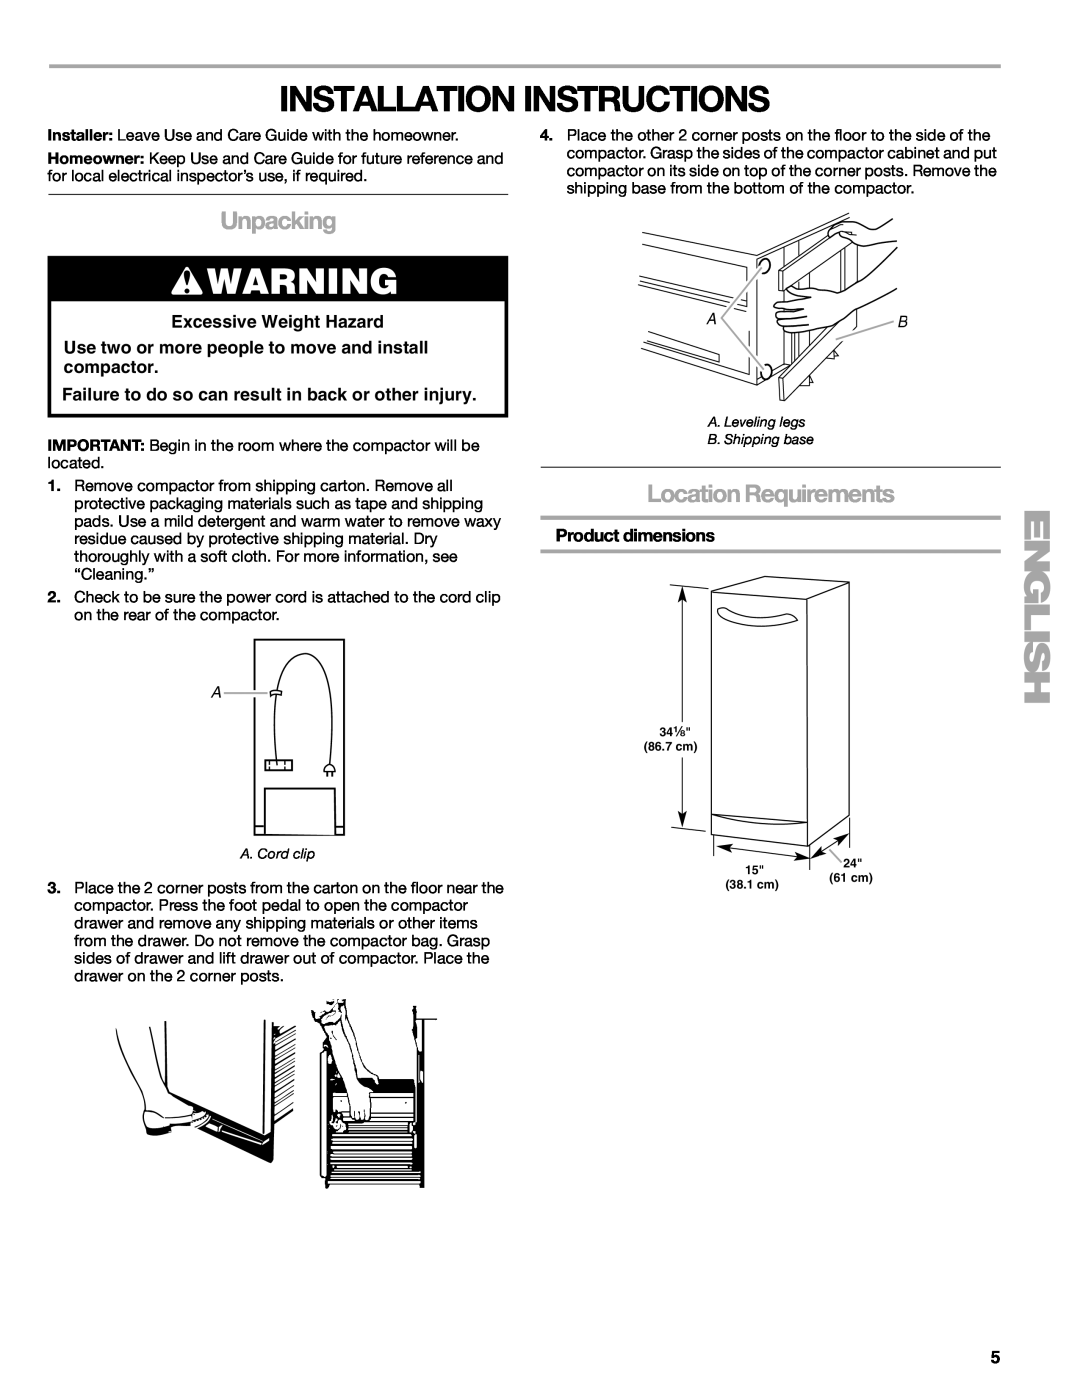 Kenmore 665.1363 Installation Instructions, Unpacking, Location Requirements, Excessive Weight Hazard, Product dimensions 